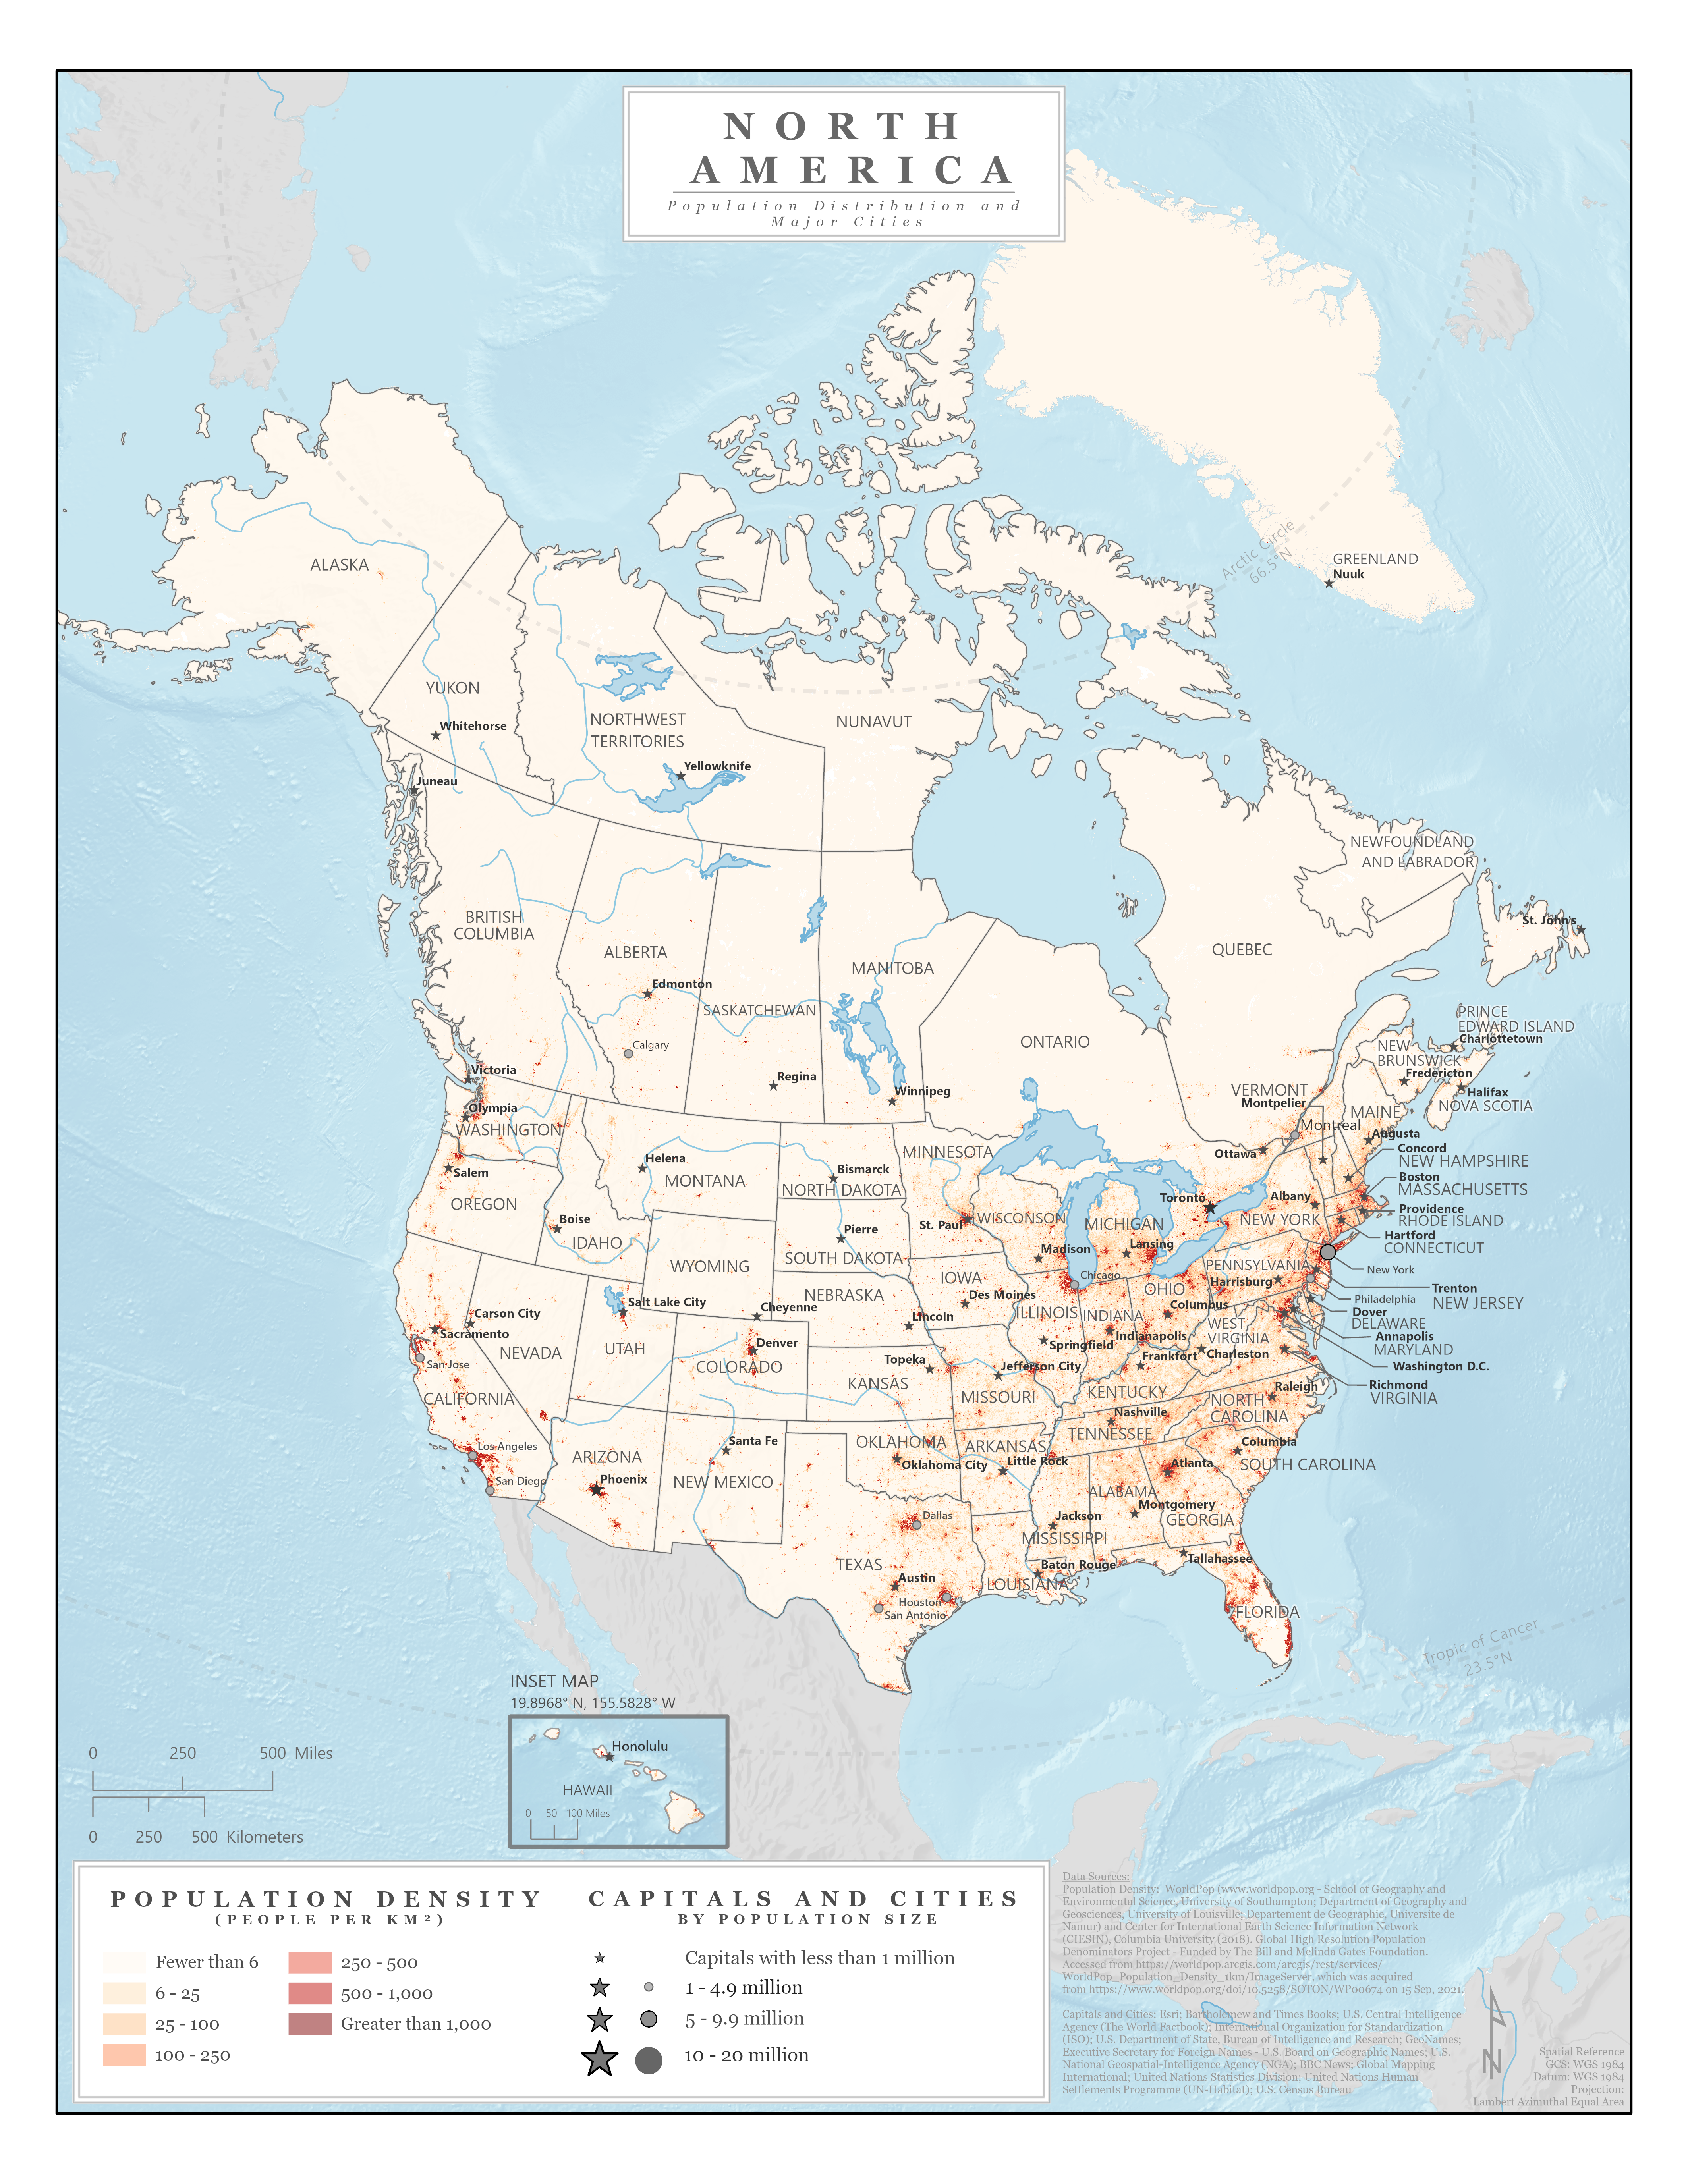 Countries, capitals, and population sizes map of North America